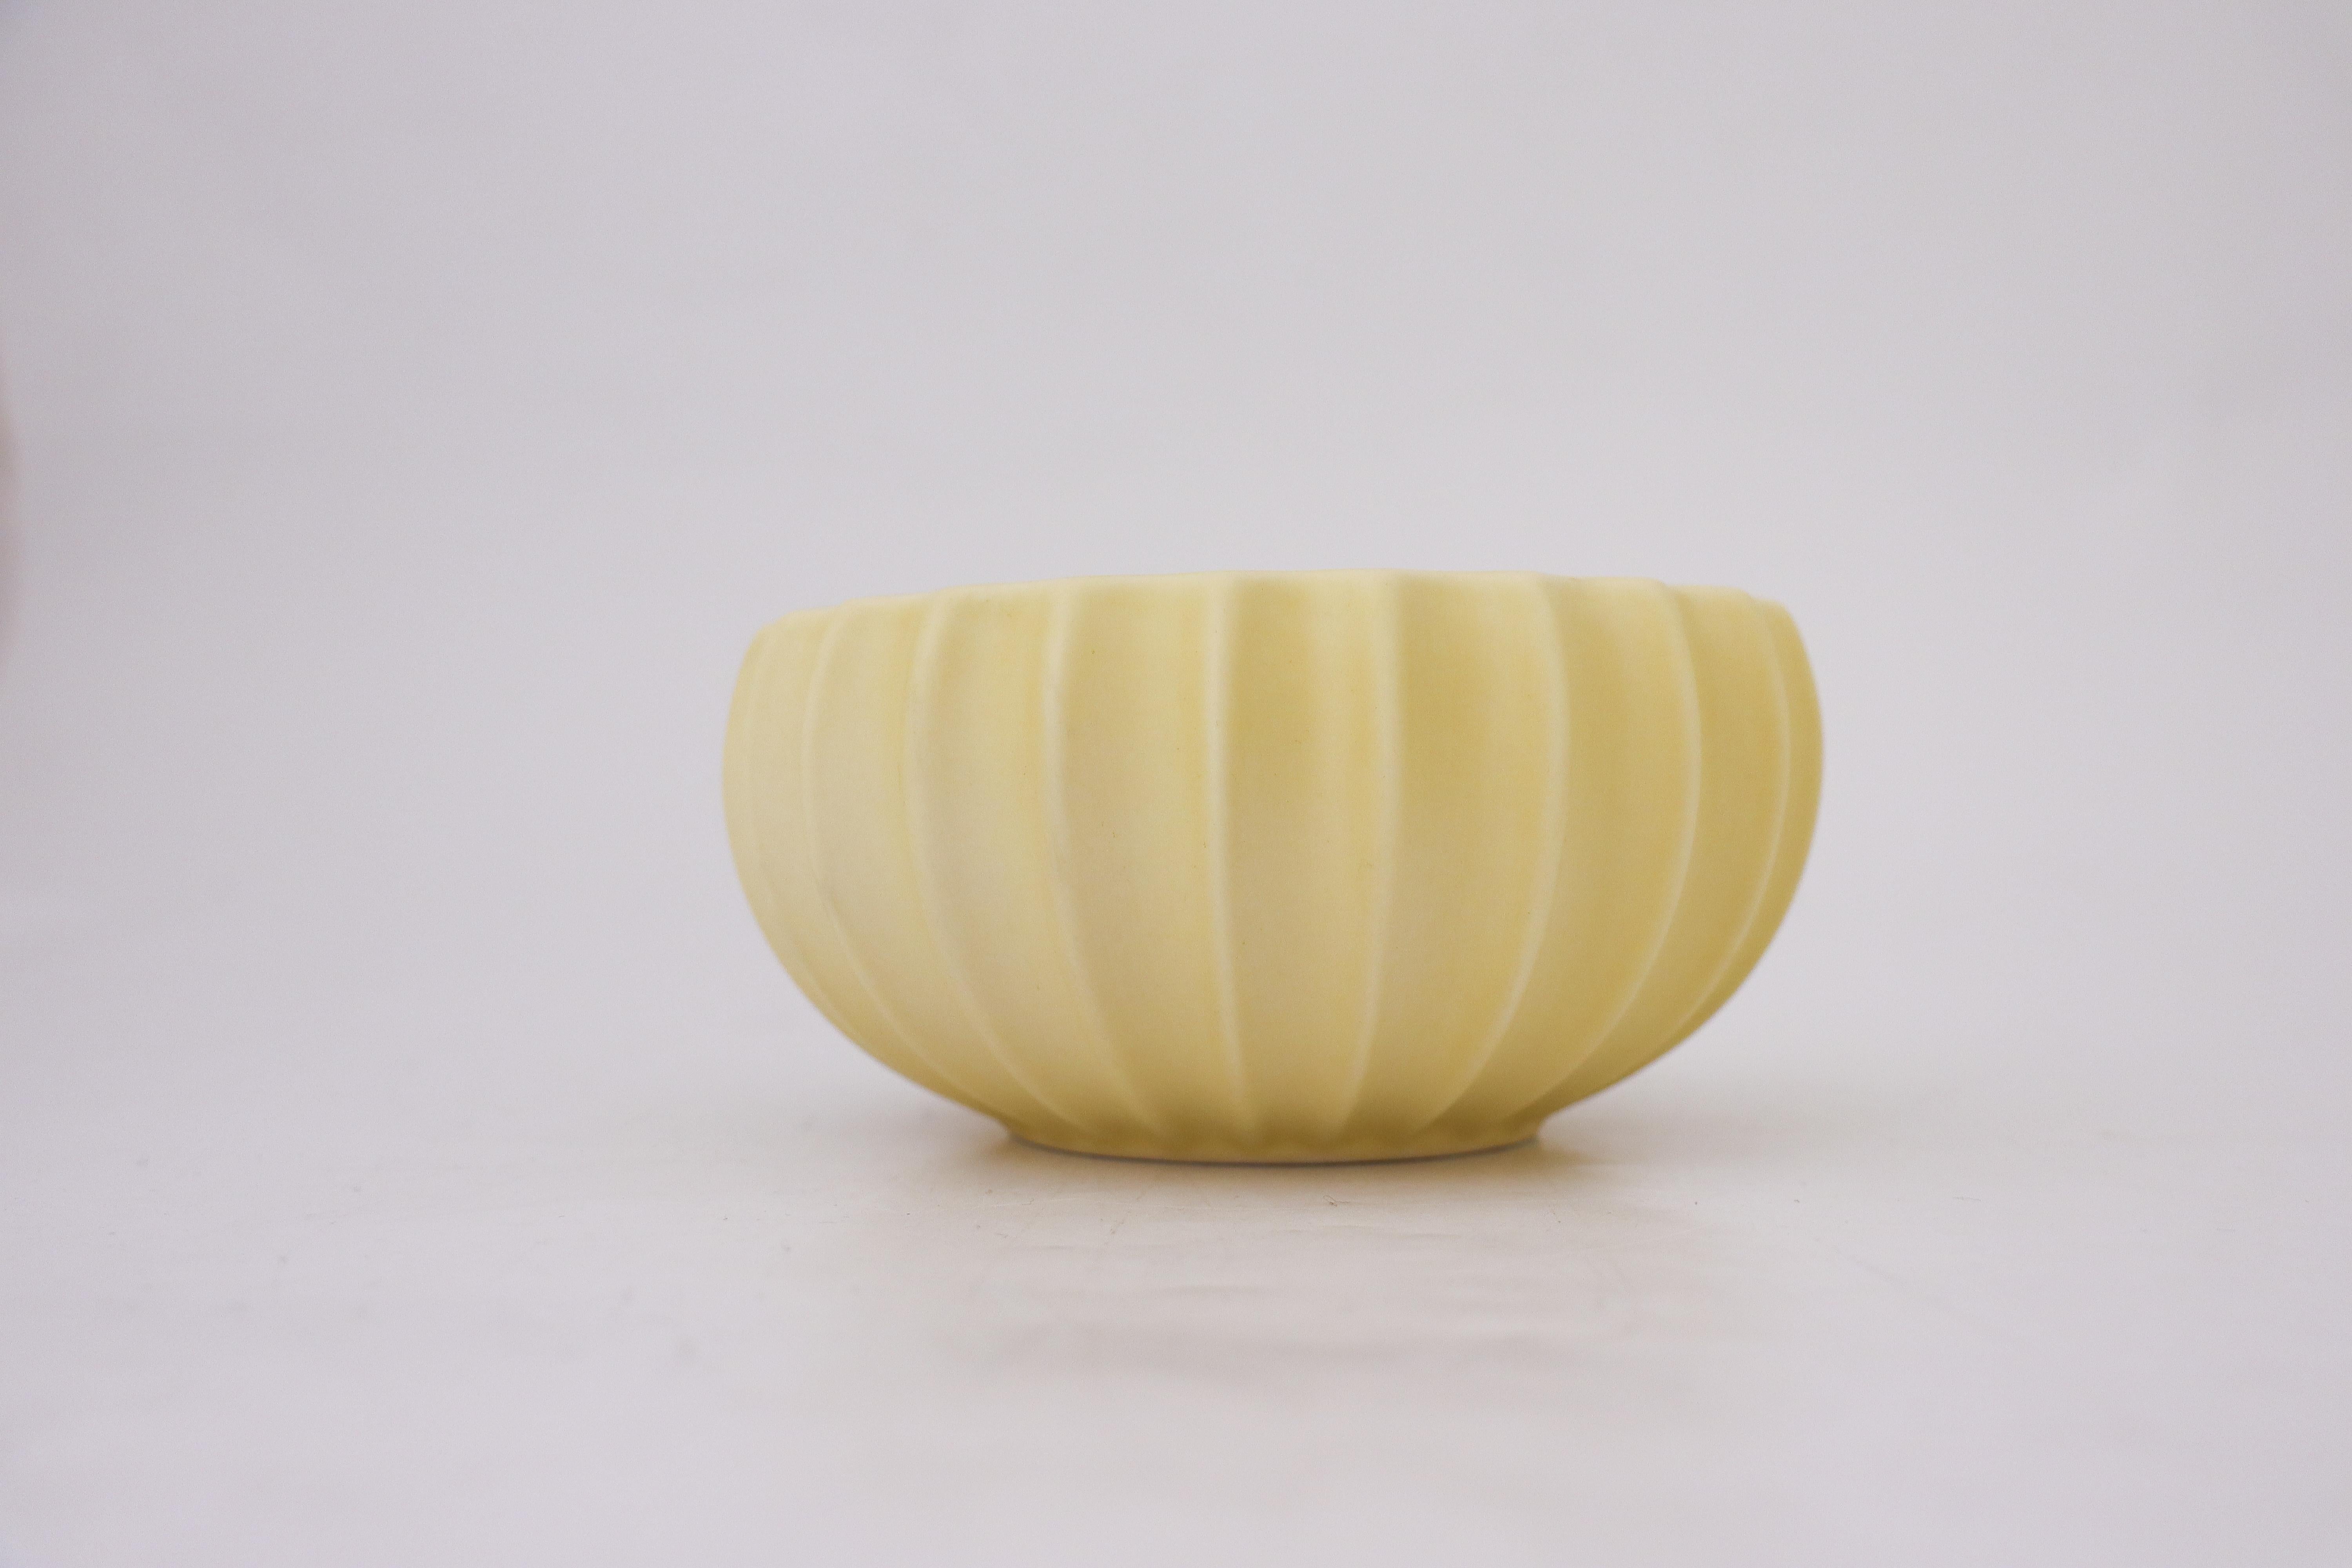 A lovely yellow bowl designed by Pia Rönndahl at Rörstrand in the 1980s. The bowl is 7 cm (2.8